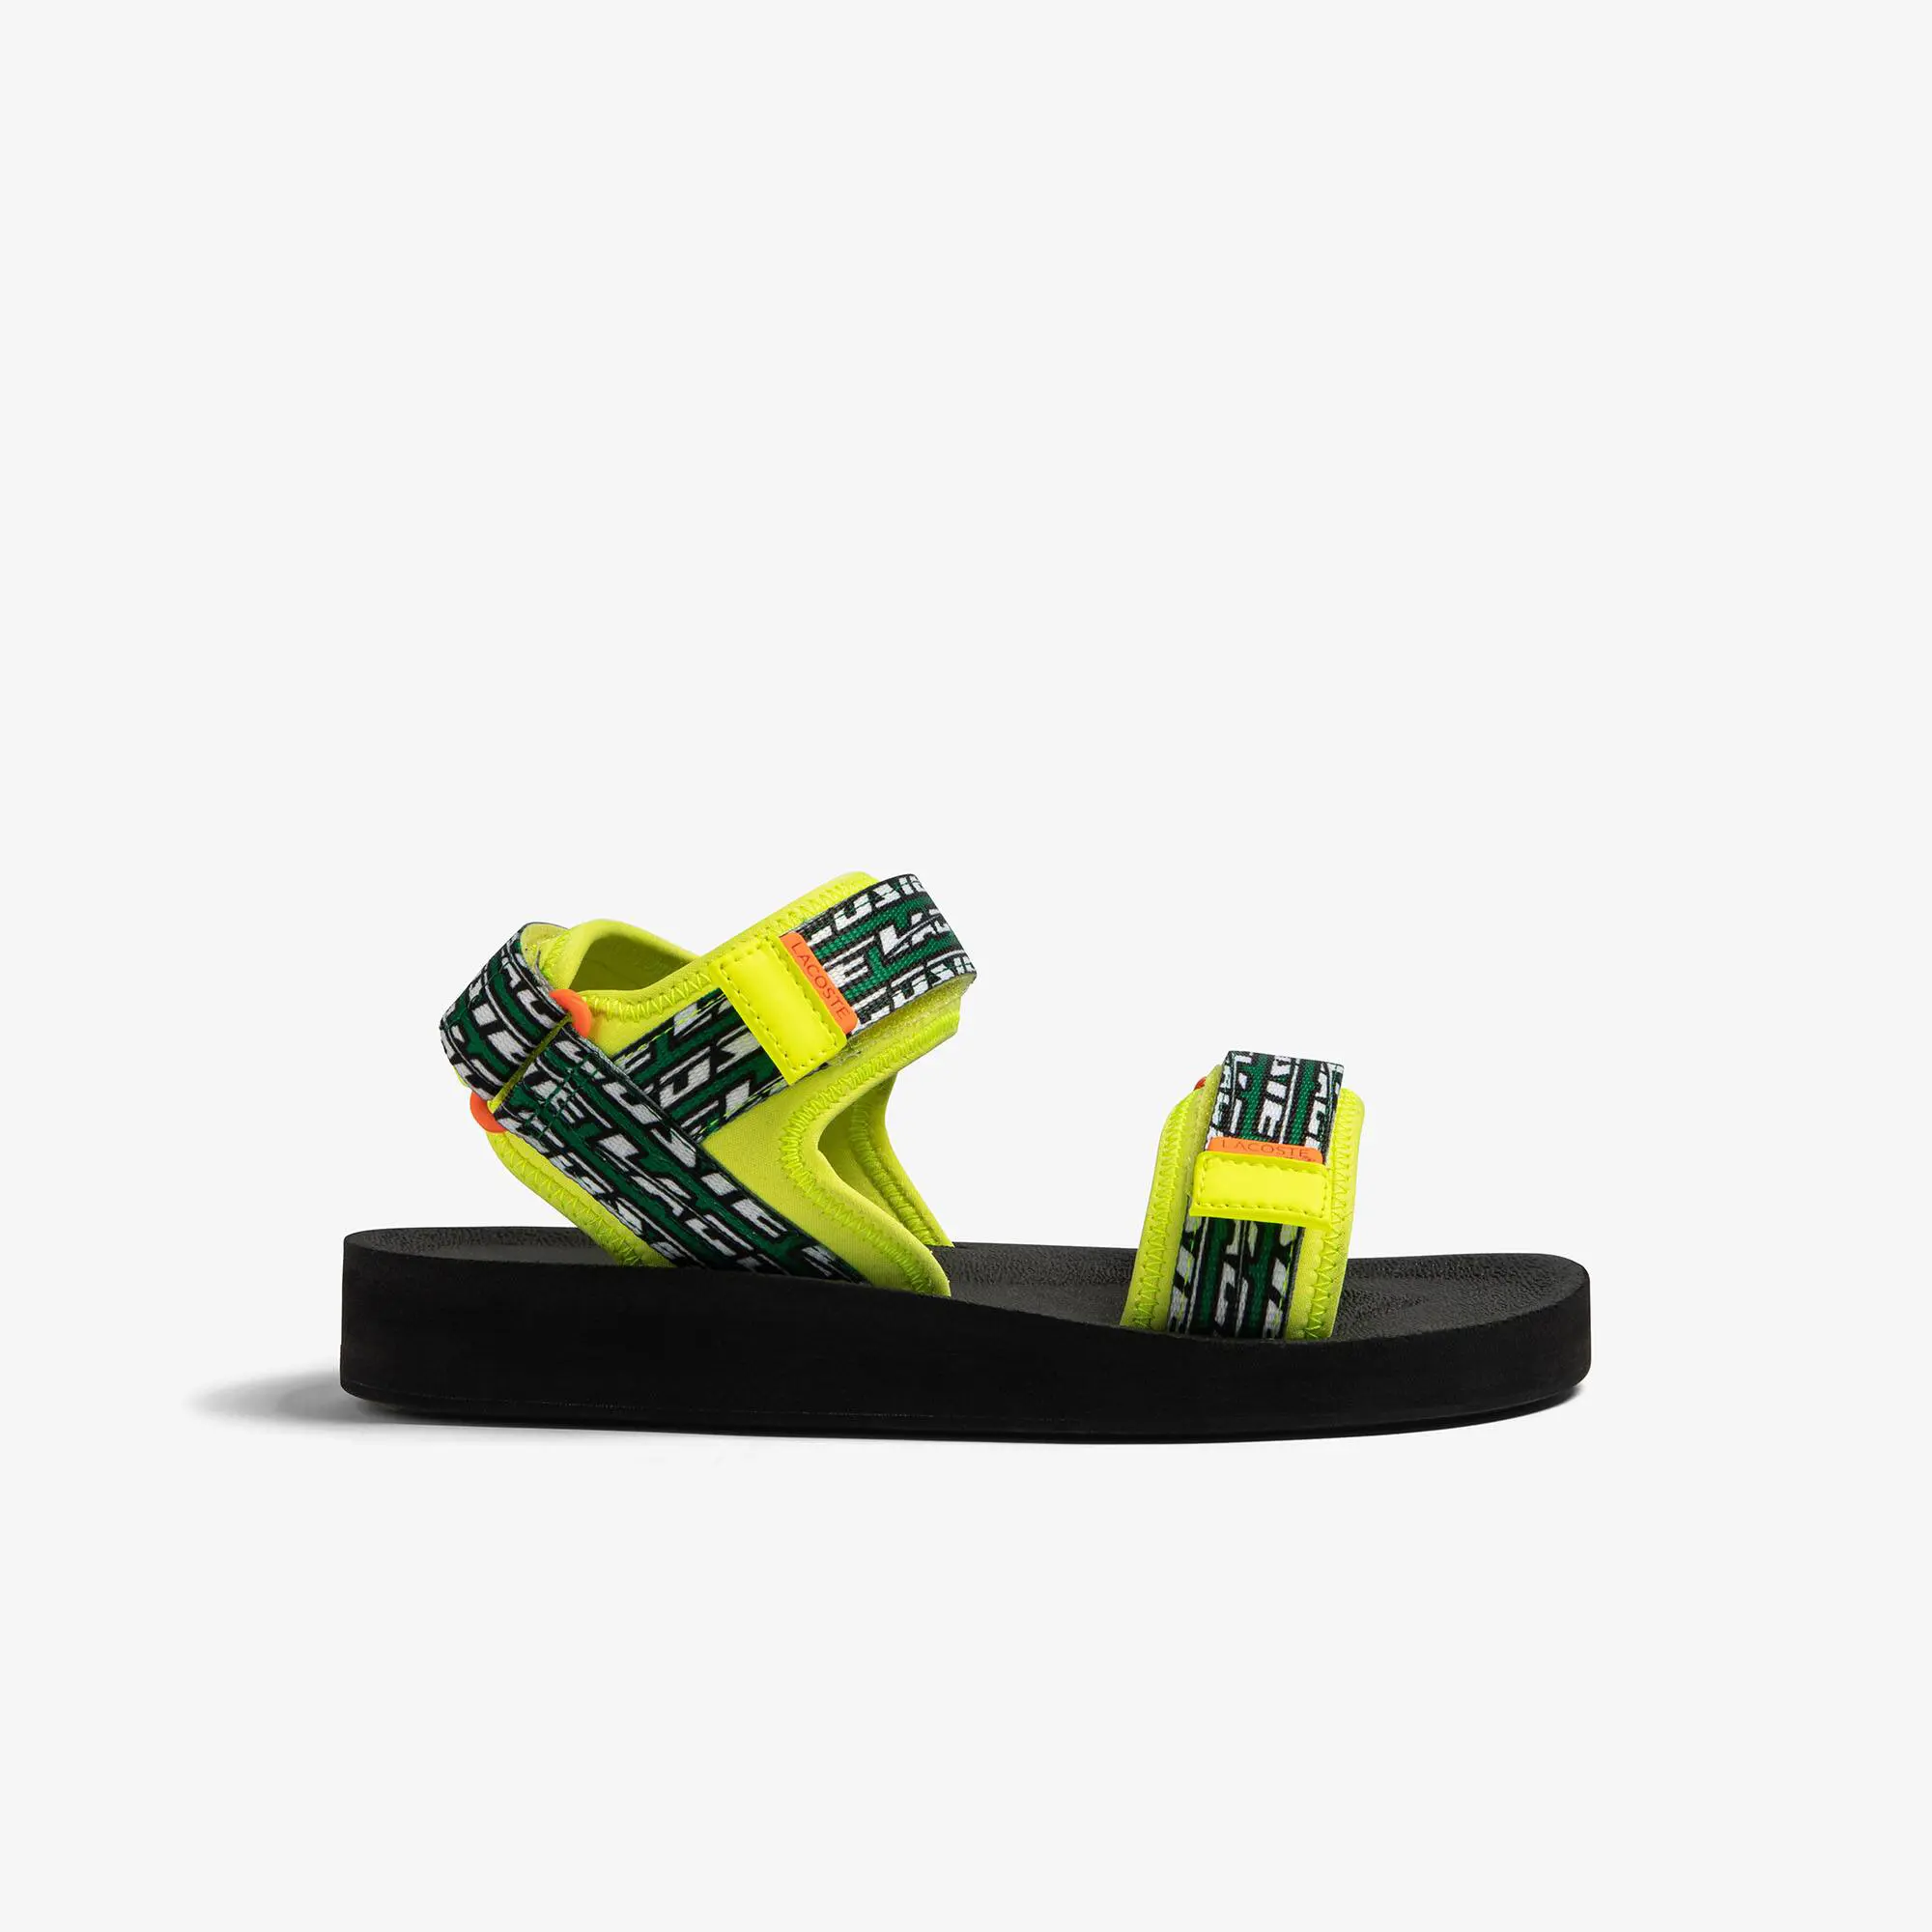 Lacoste Women's Lacoste Suruga Synthetic Sandals. 1